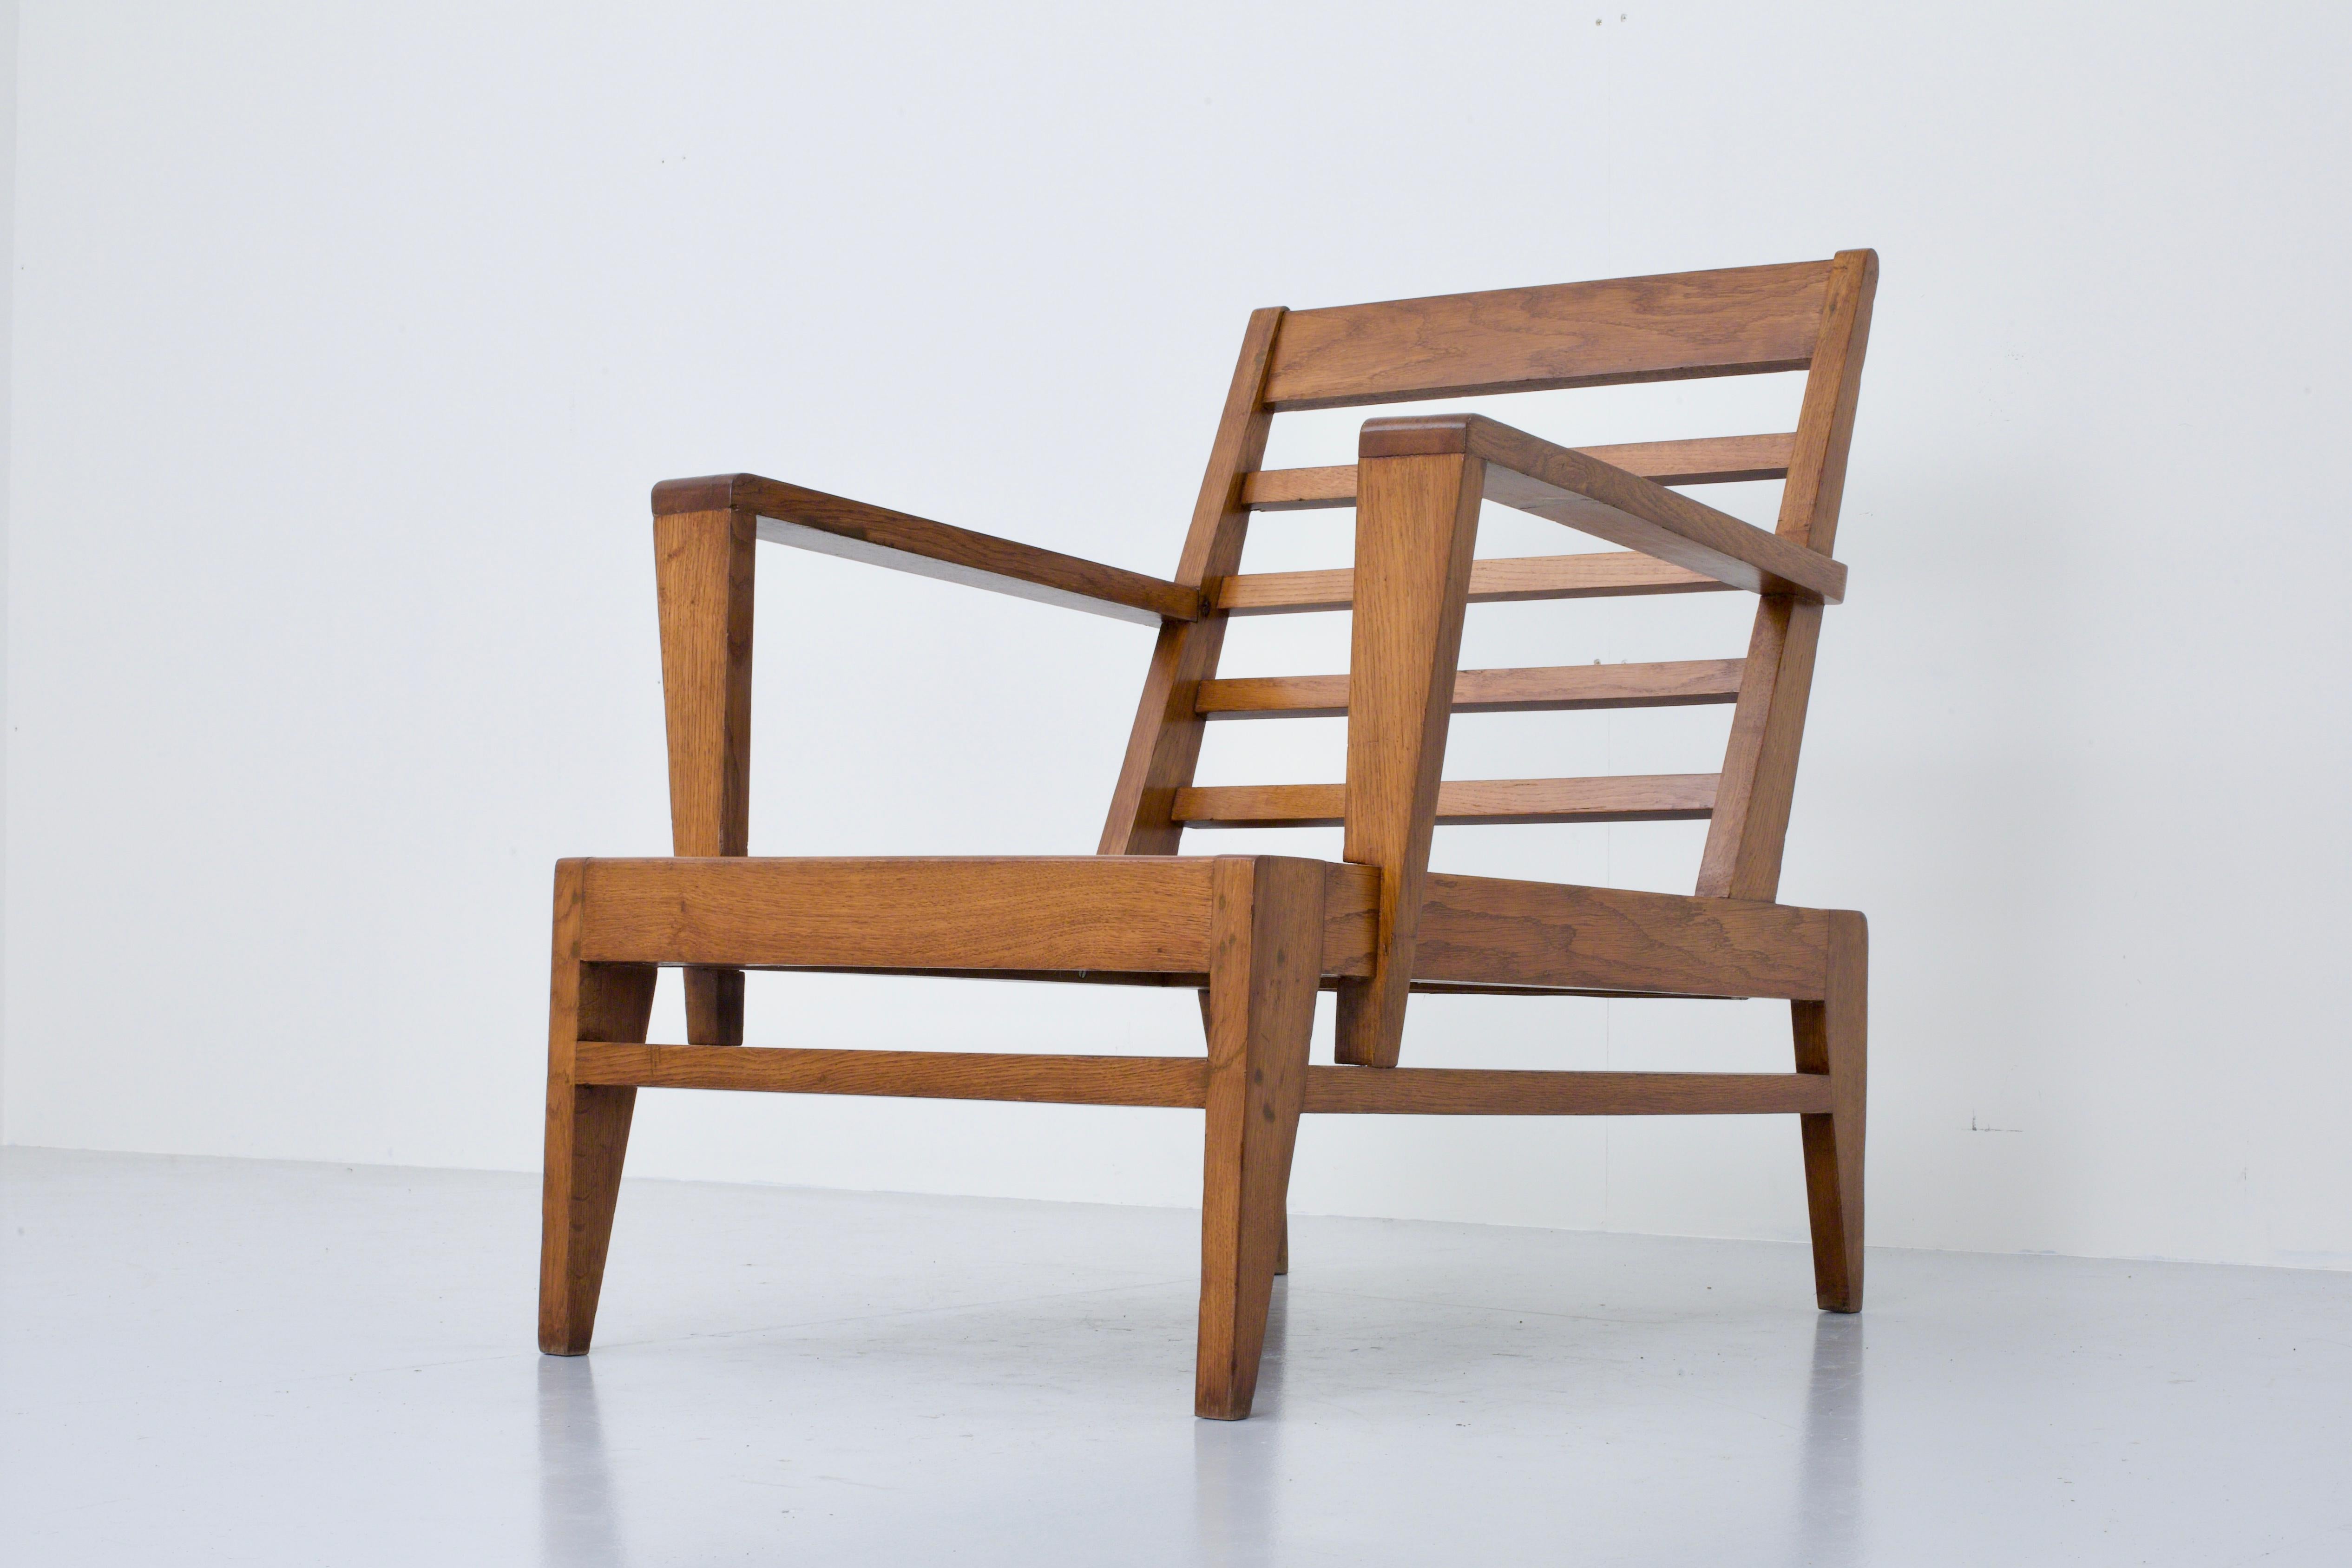 Lounge chair by René Gabriel in solid oak and fabric, France, 1940

A very comfortable lounge chair by Rene Gabriel. Sturdy yet elegant and being slightly out of proportion, this chair has everything toattract your attention. The strong shapes and